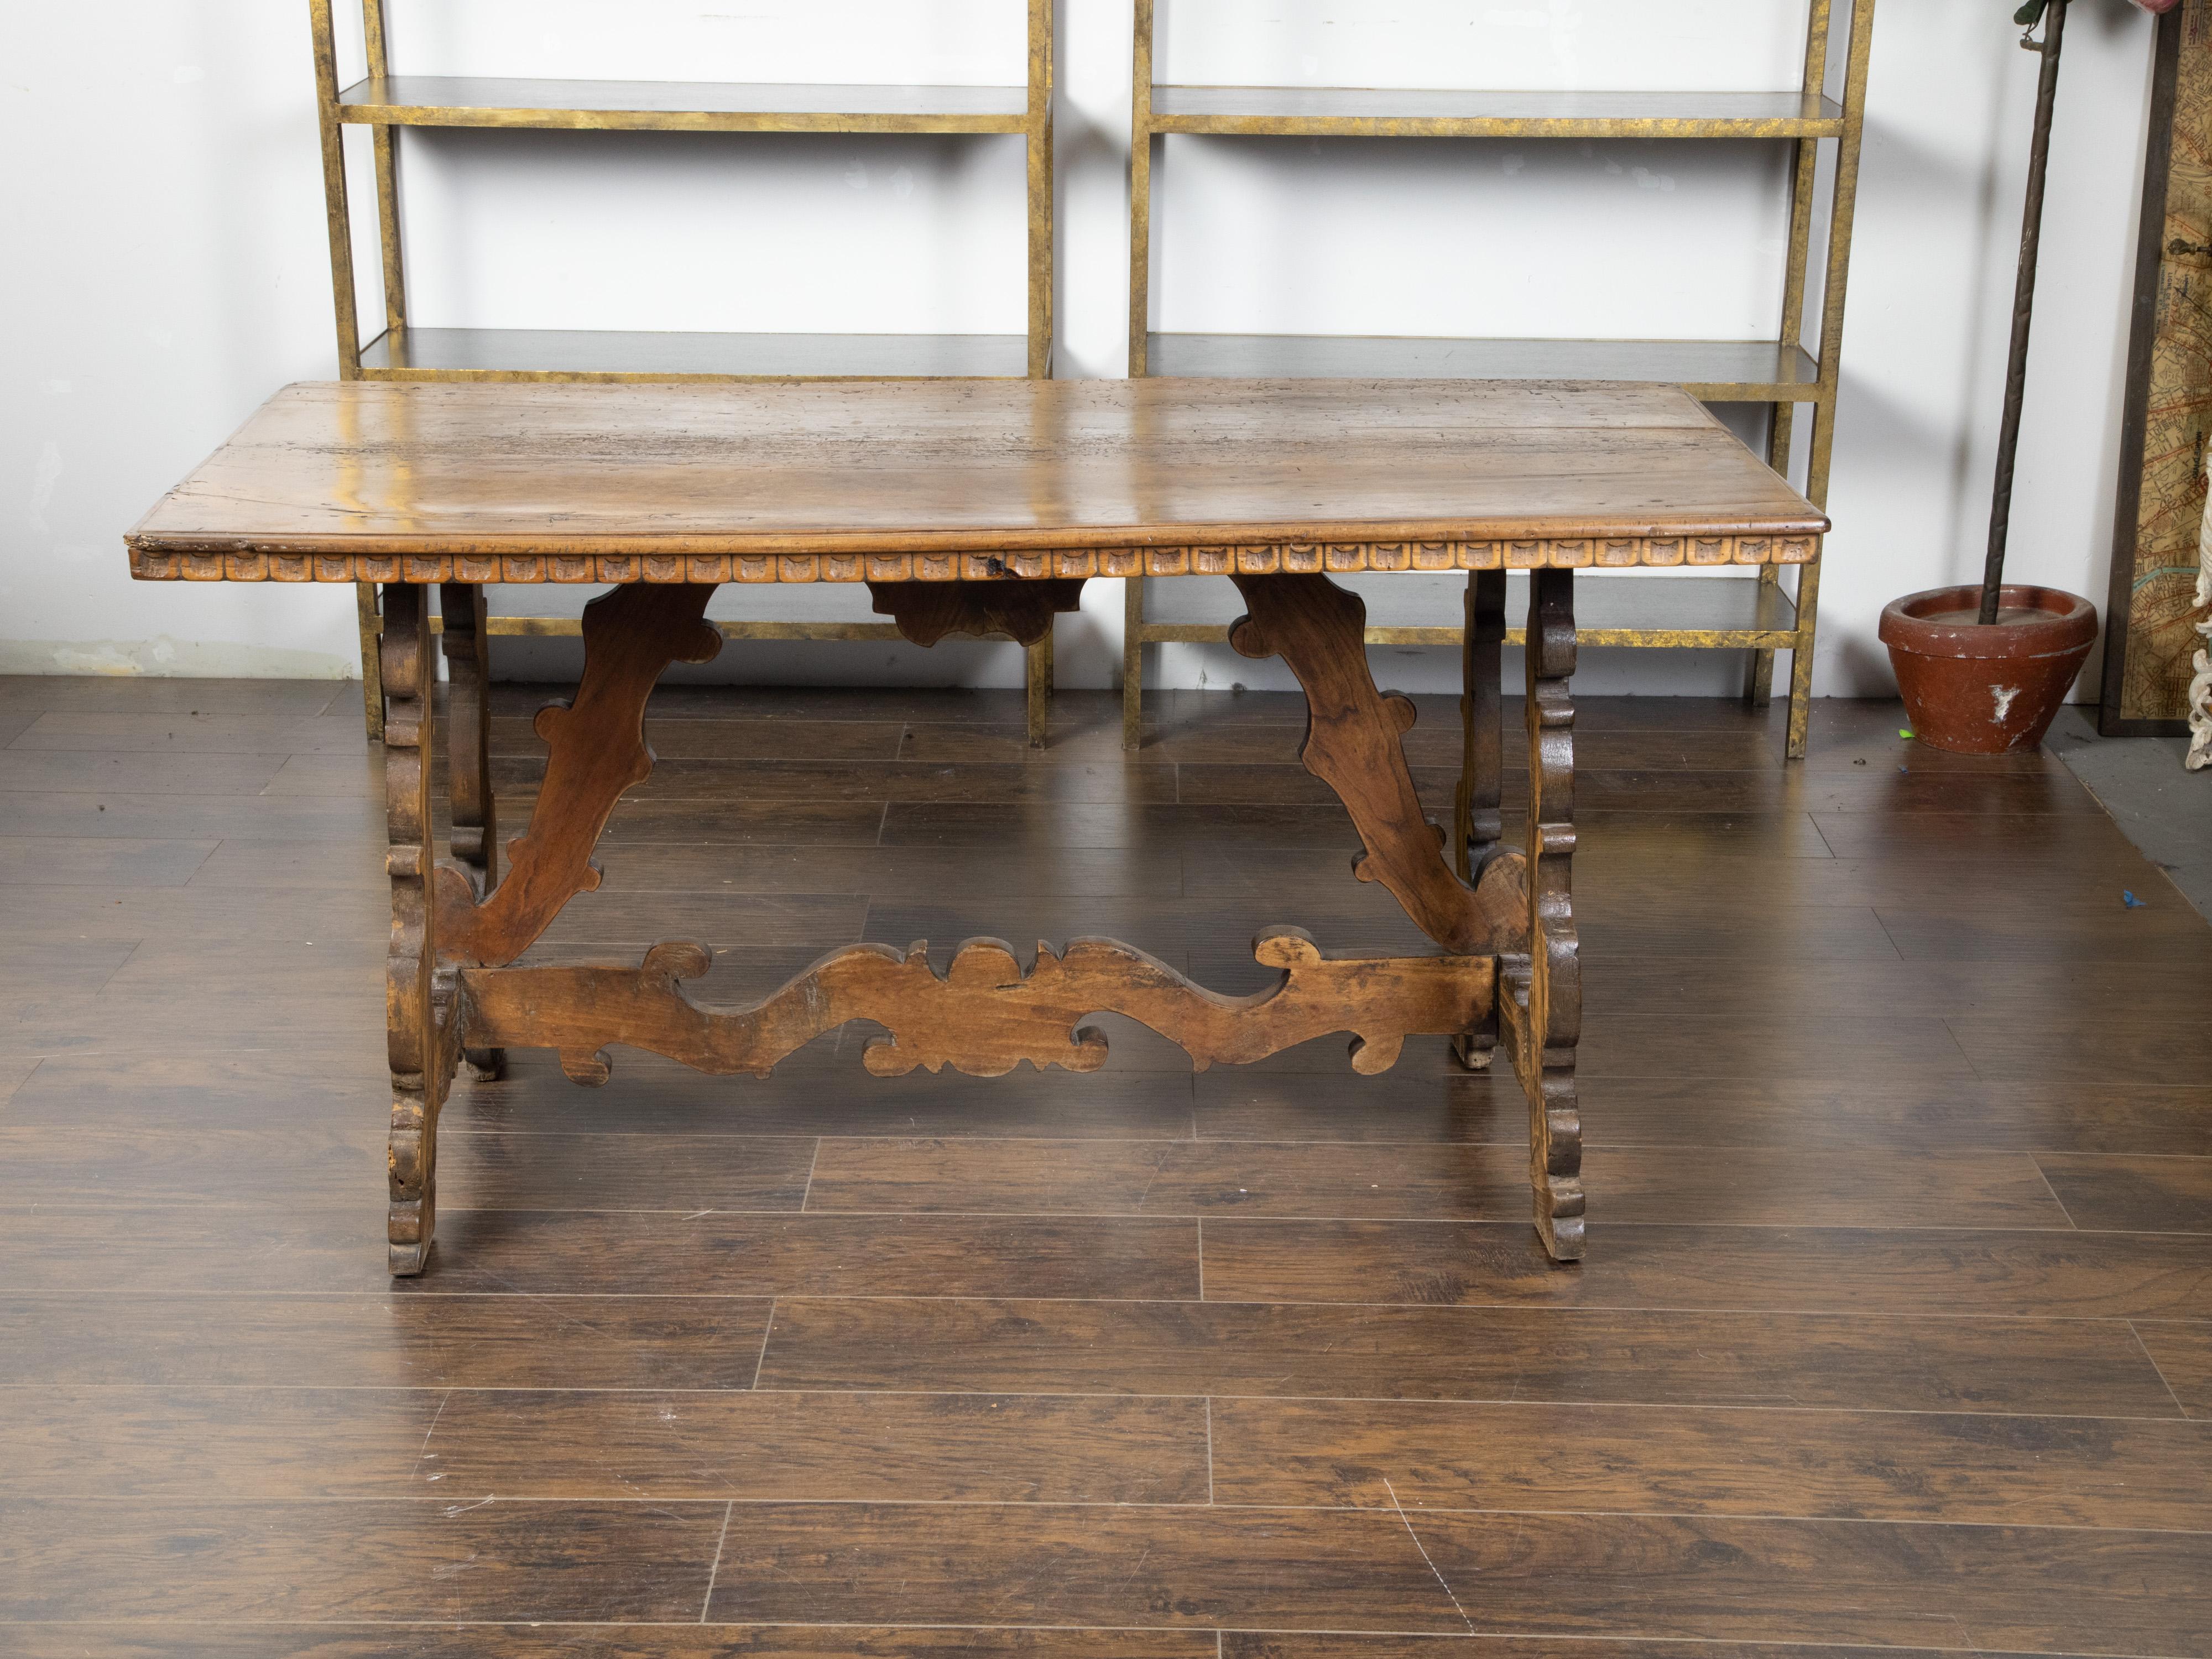 An Italian Baroque style walnut table from the 19th century, with carved trestle base and scoop motifs. Created in Italy during the 19th century, this table features a rectangular top with carved scoop motifs on the apron, sitting above an exquisite